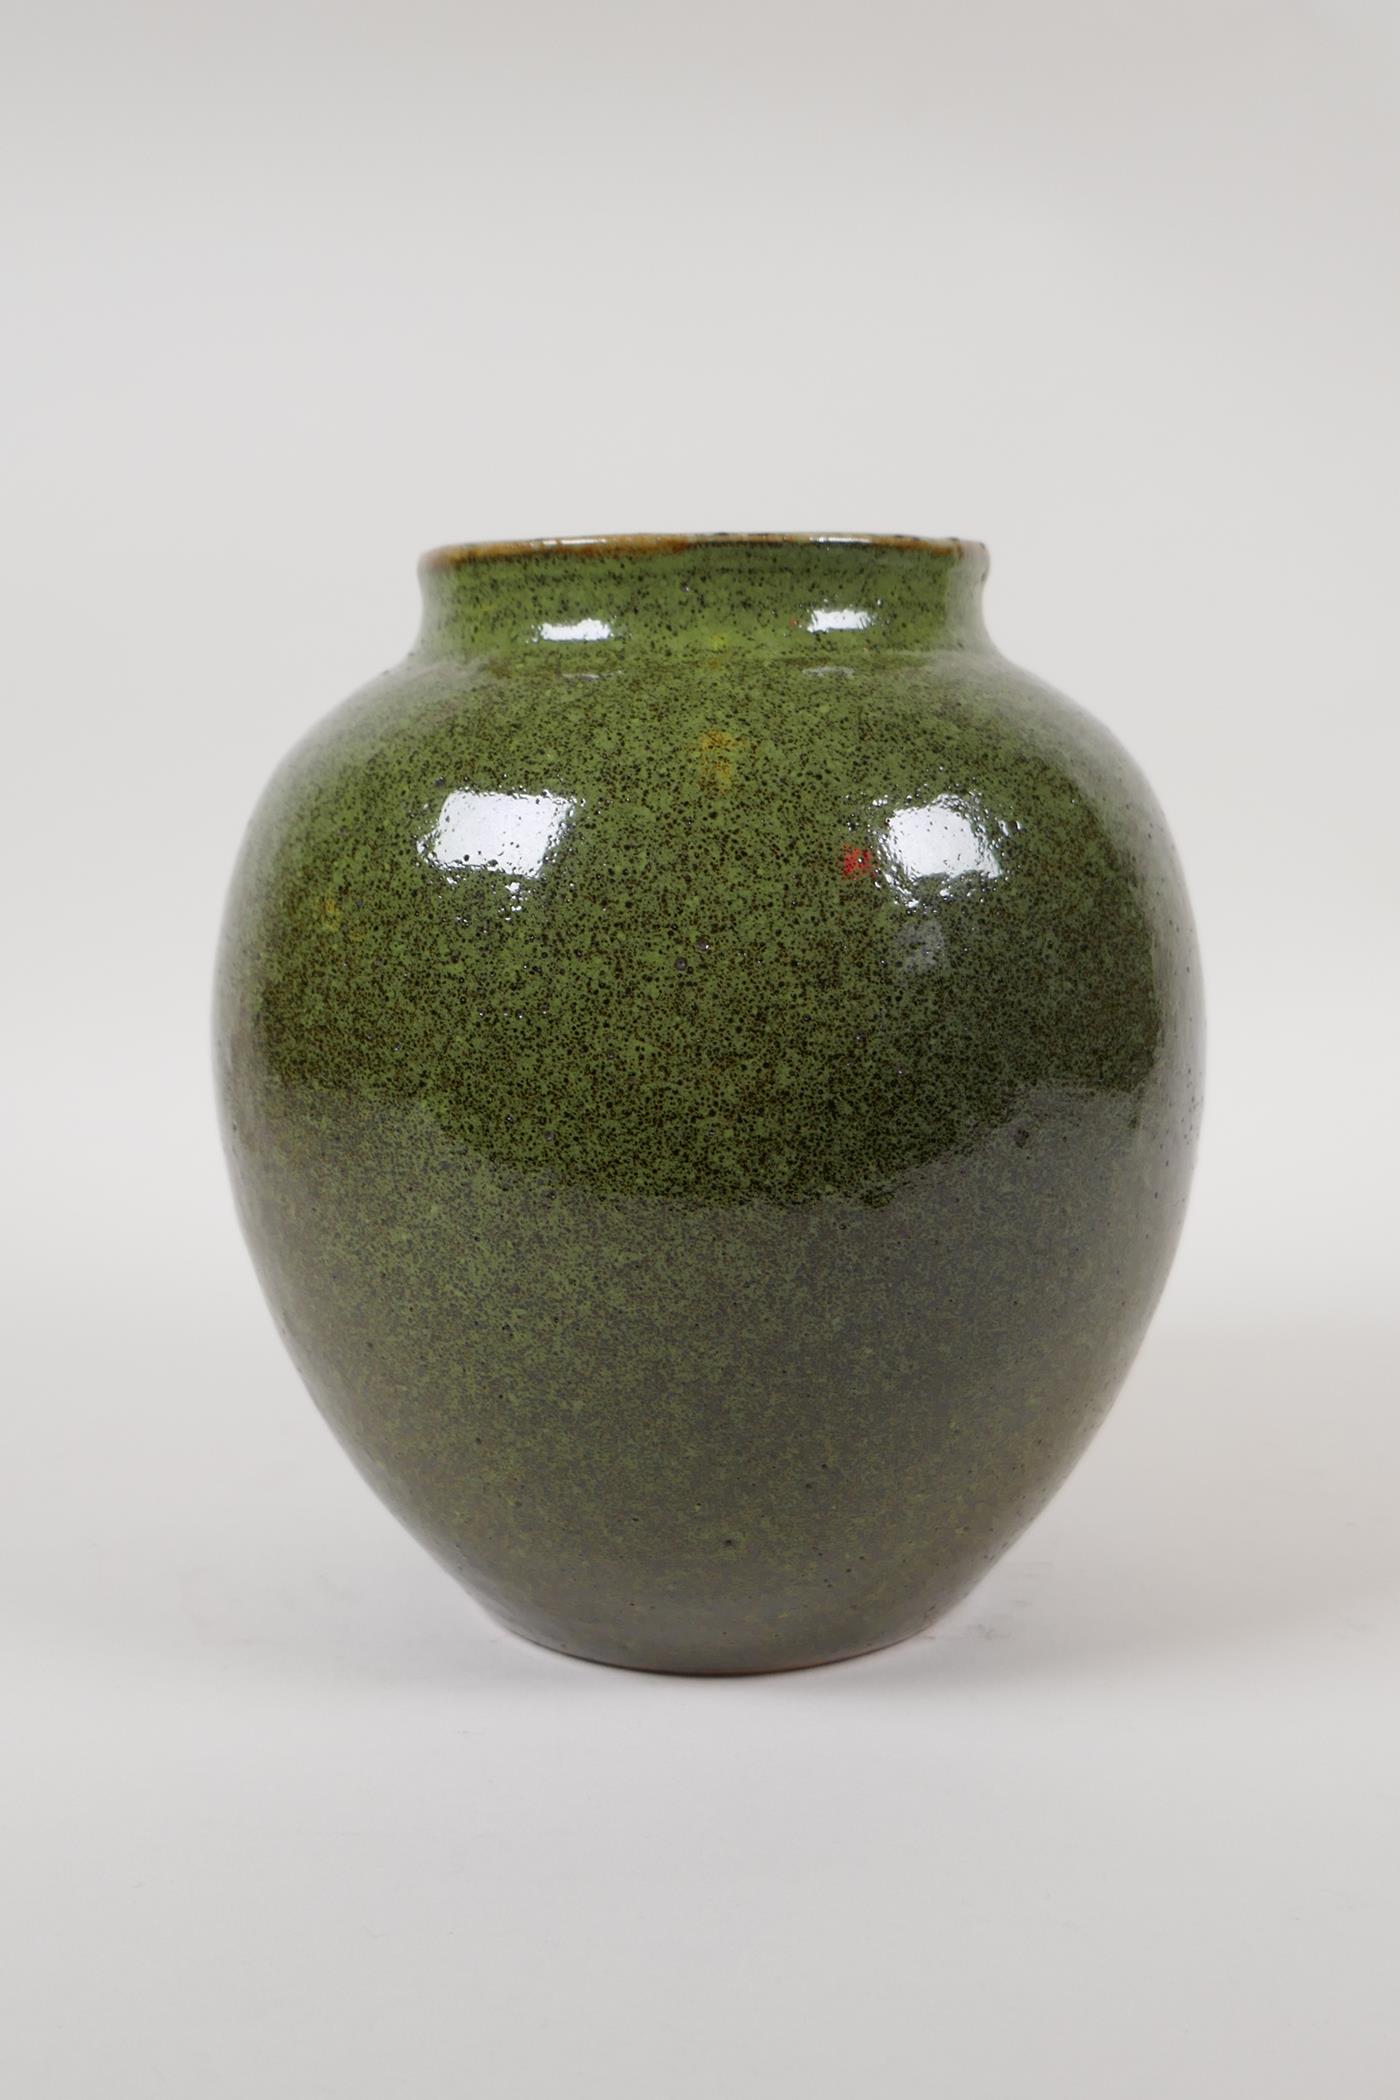 A Chinese green speckled glaze pottery jar, 7" high